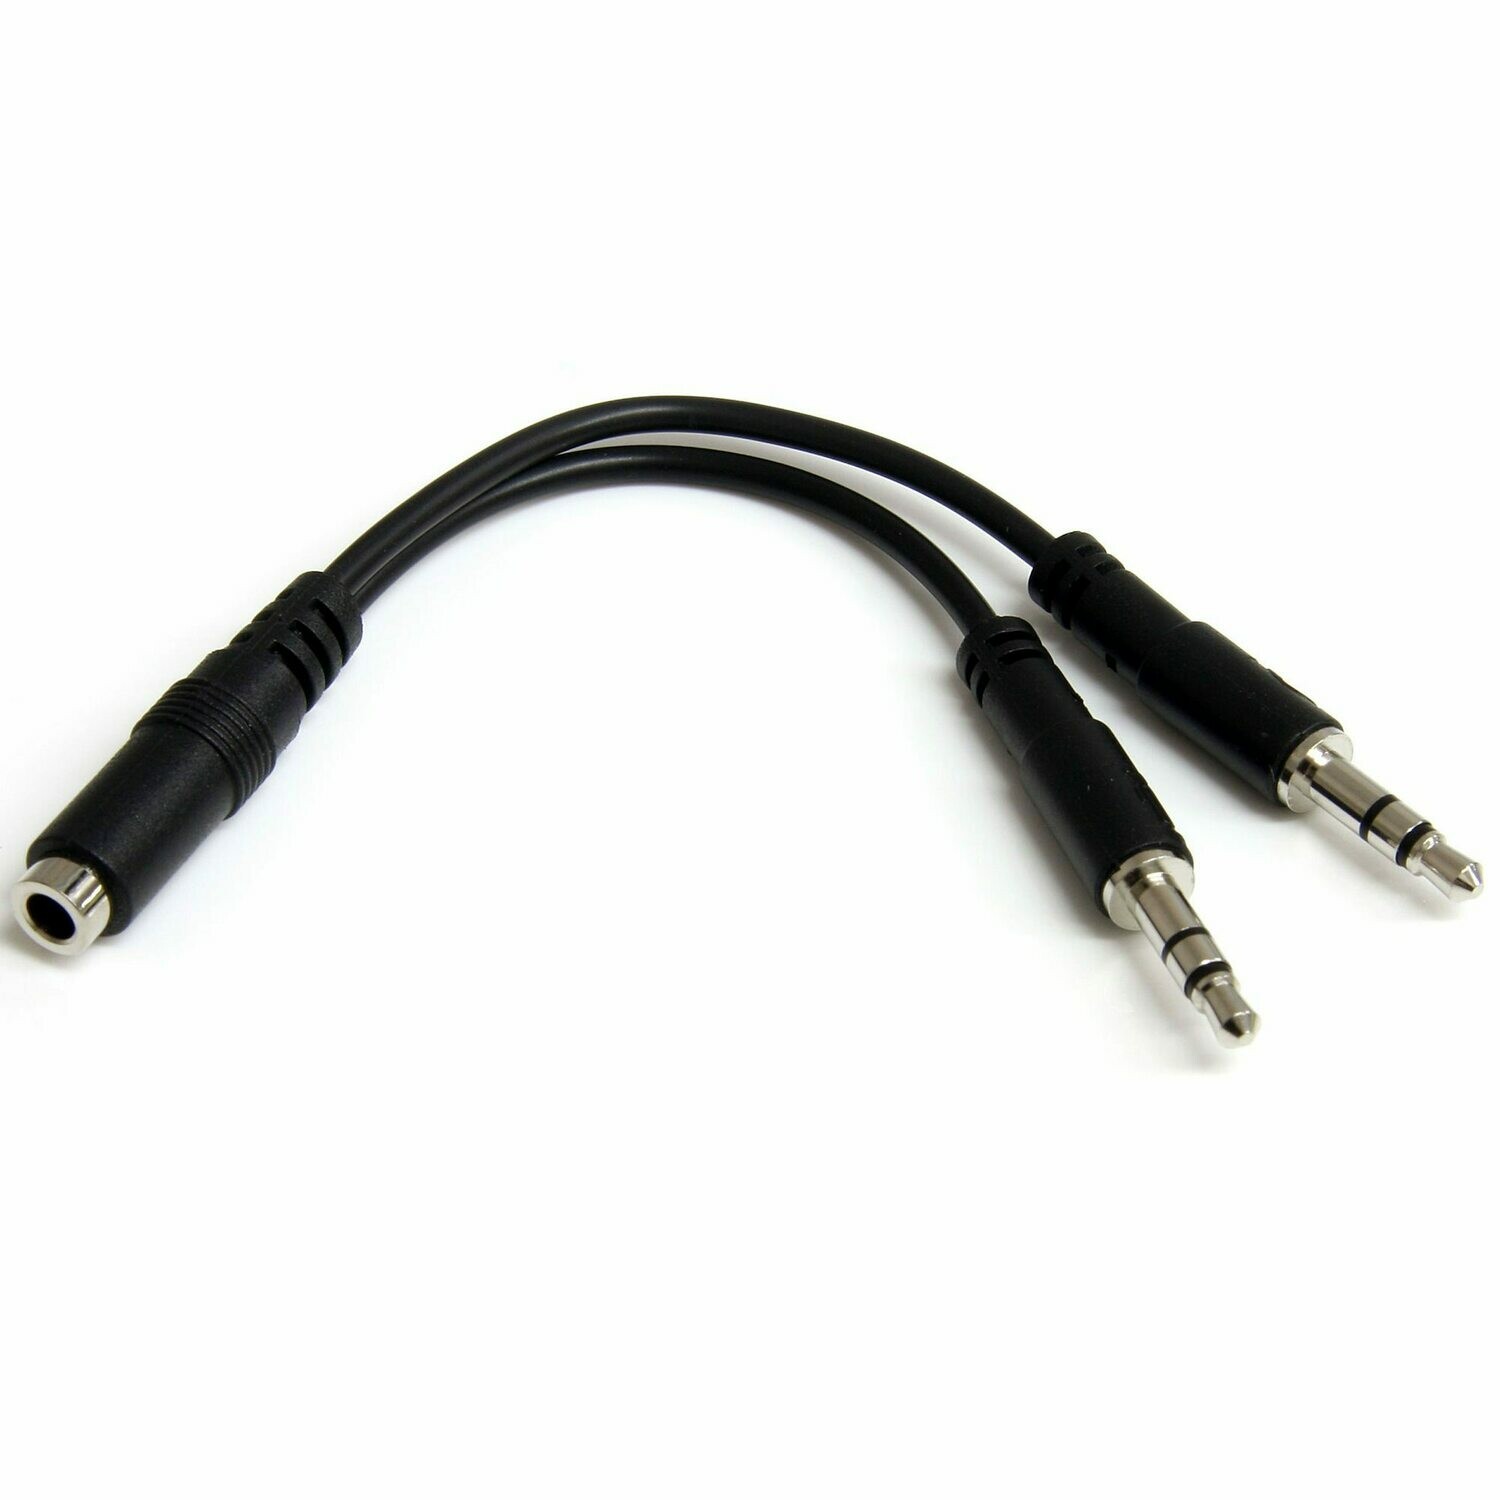 3.5mm 4 Position to 2x 3 Position 3.5mm Headset Splitter Adapter - F/M